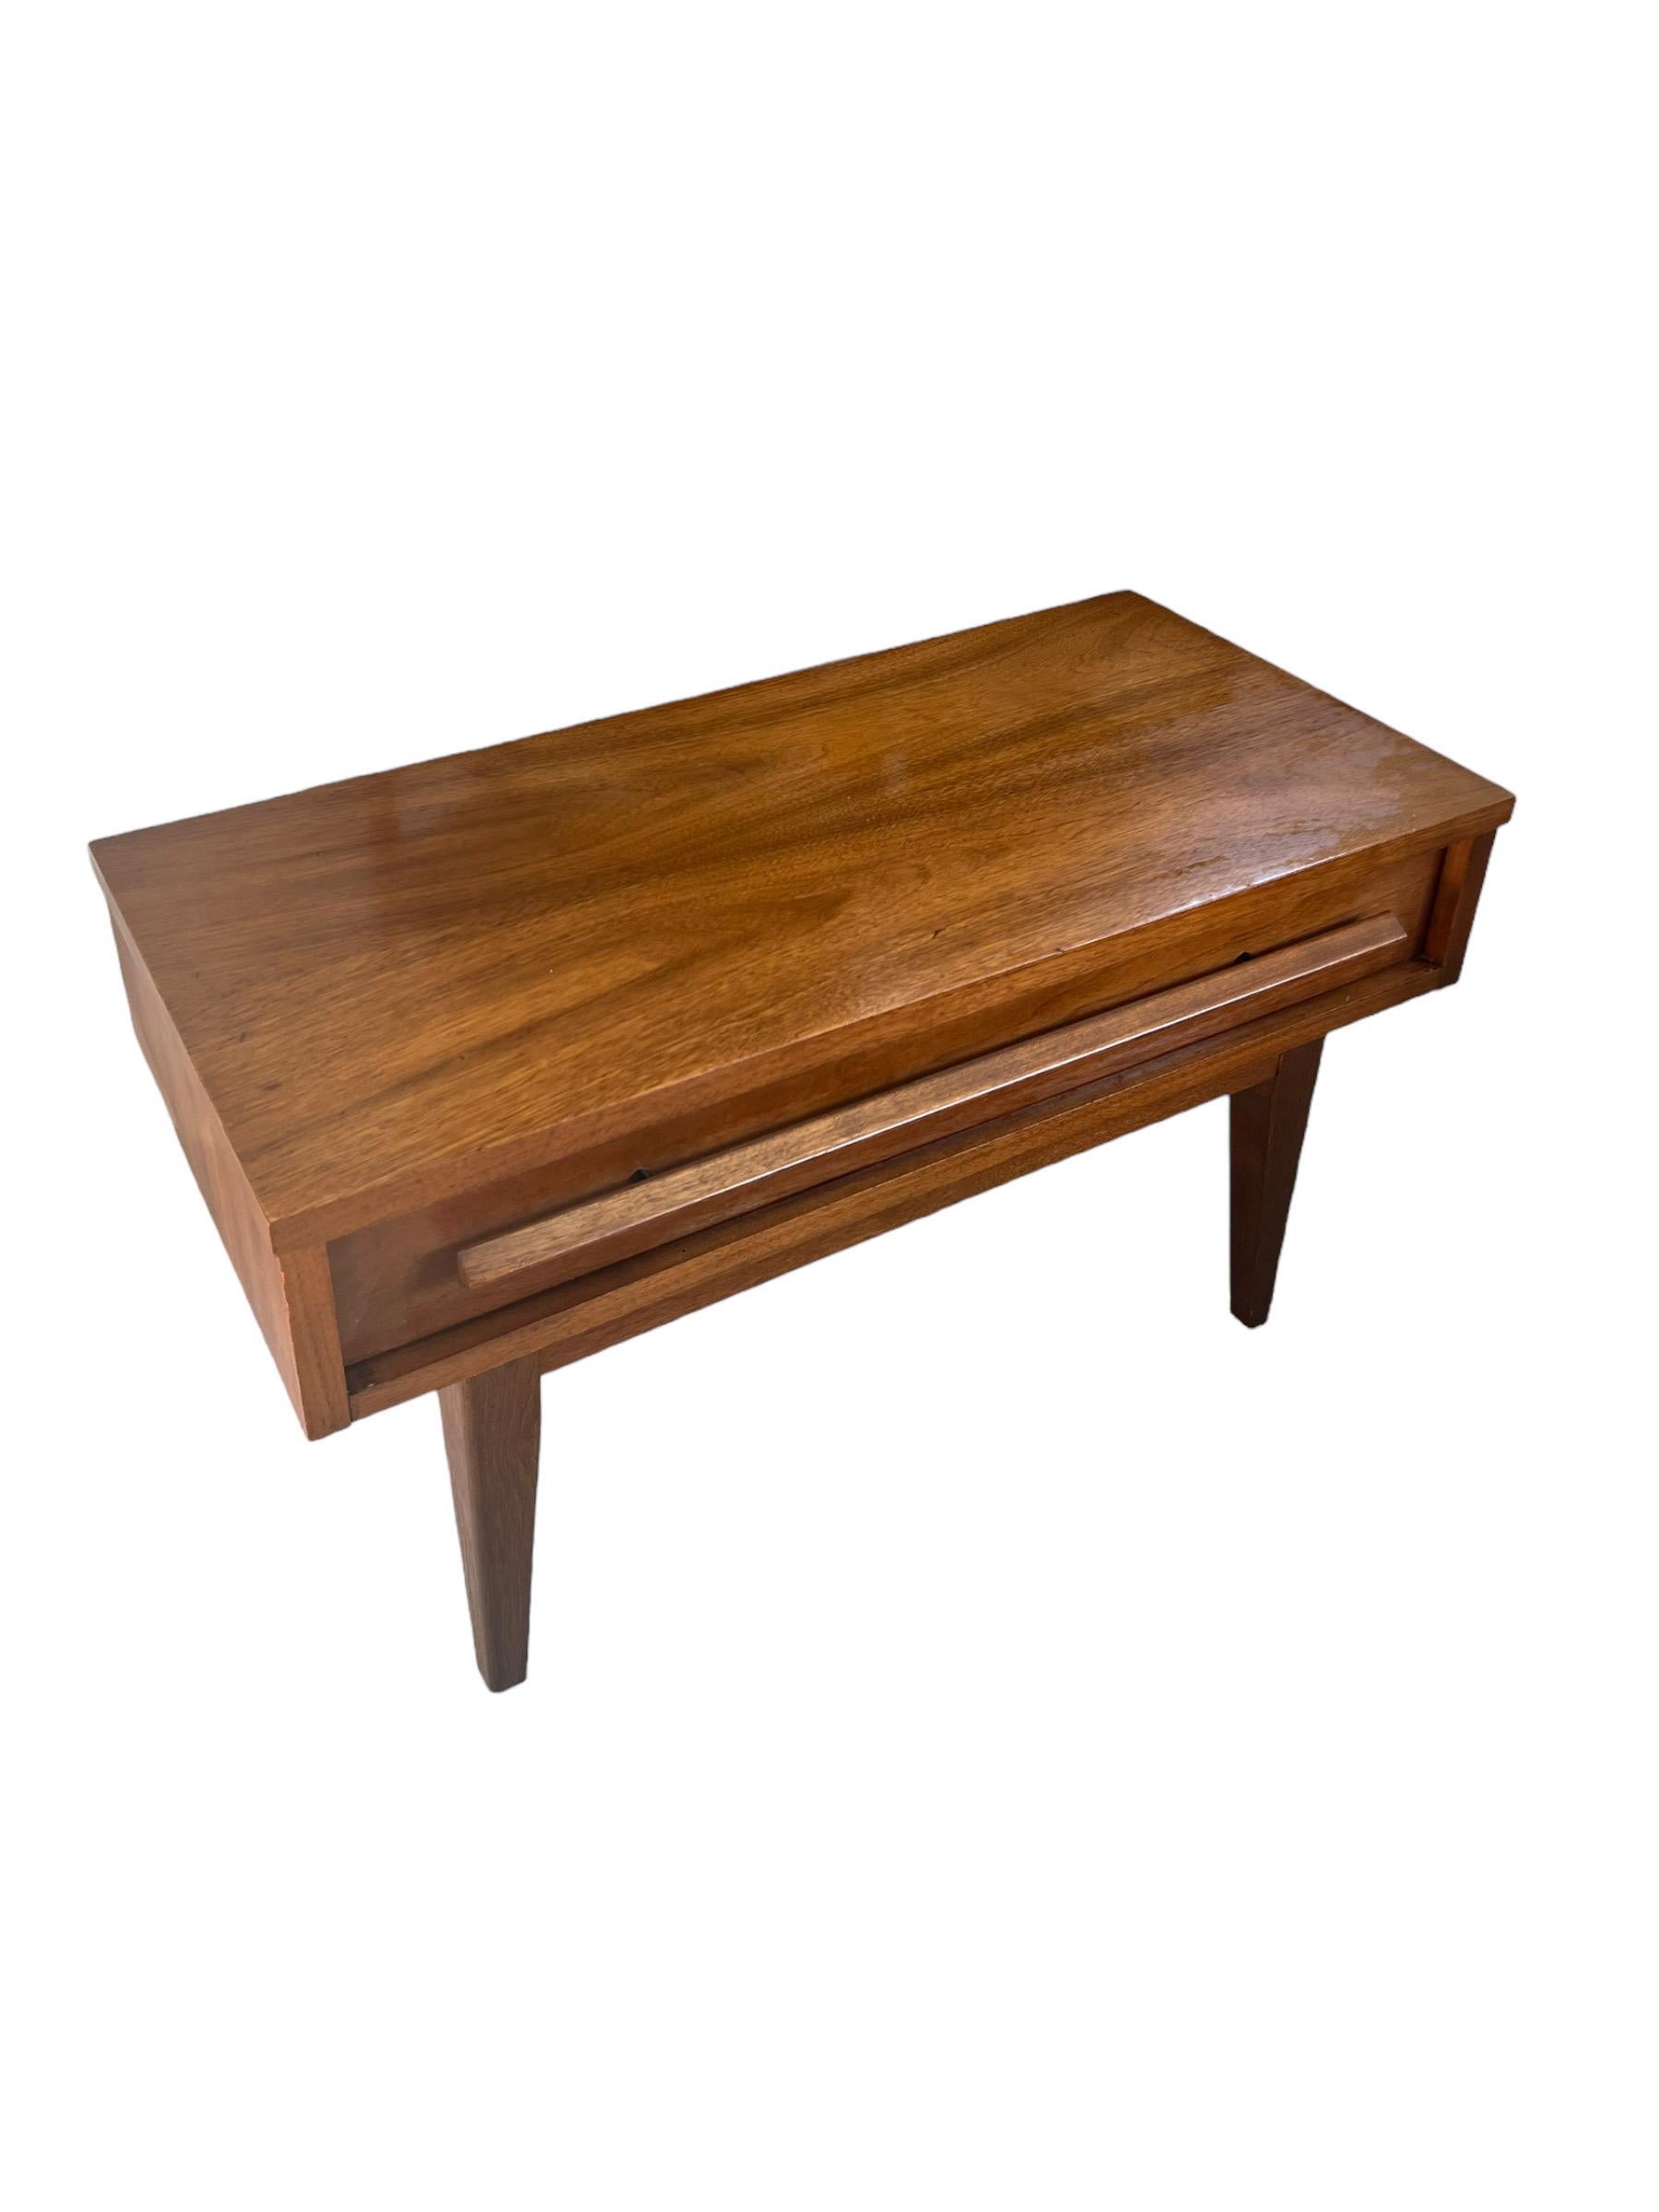 Vintage Mid Century Modern End Table or Stand With Dovetailed Drawer Cherry Wood For Sale 1